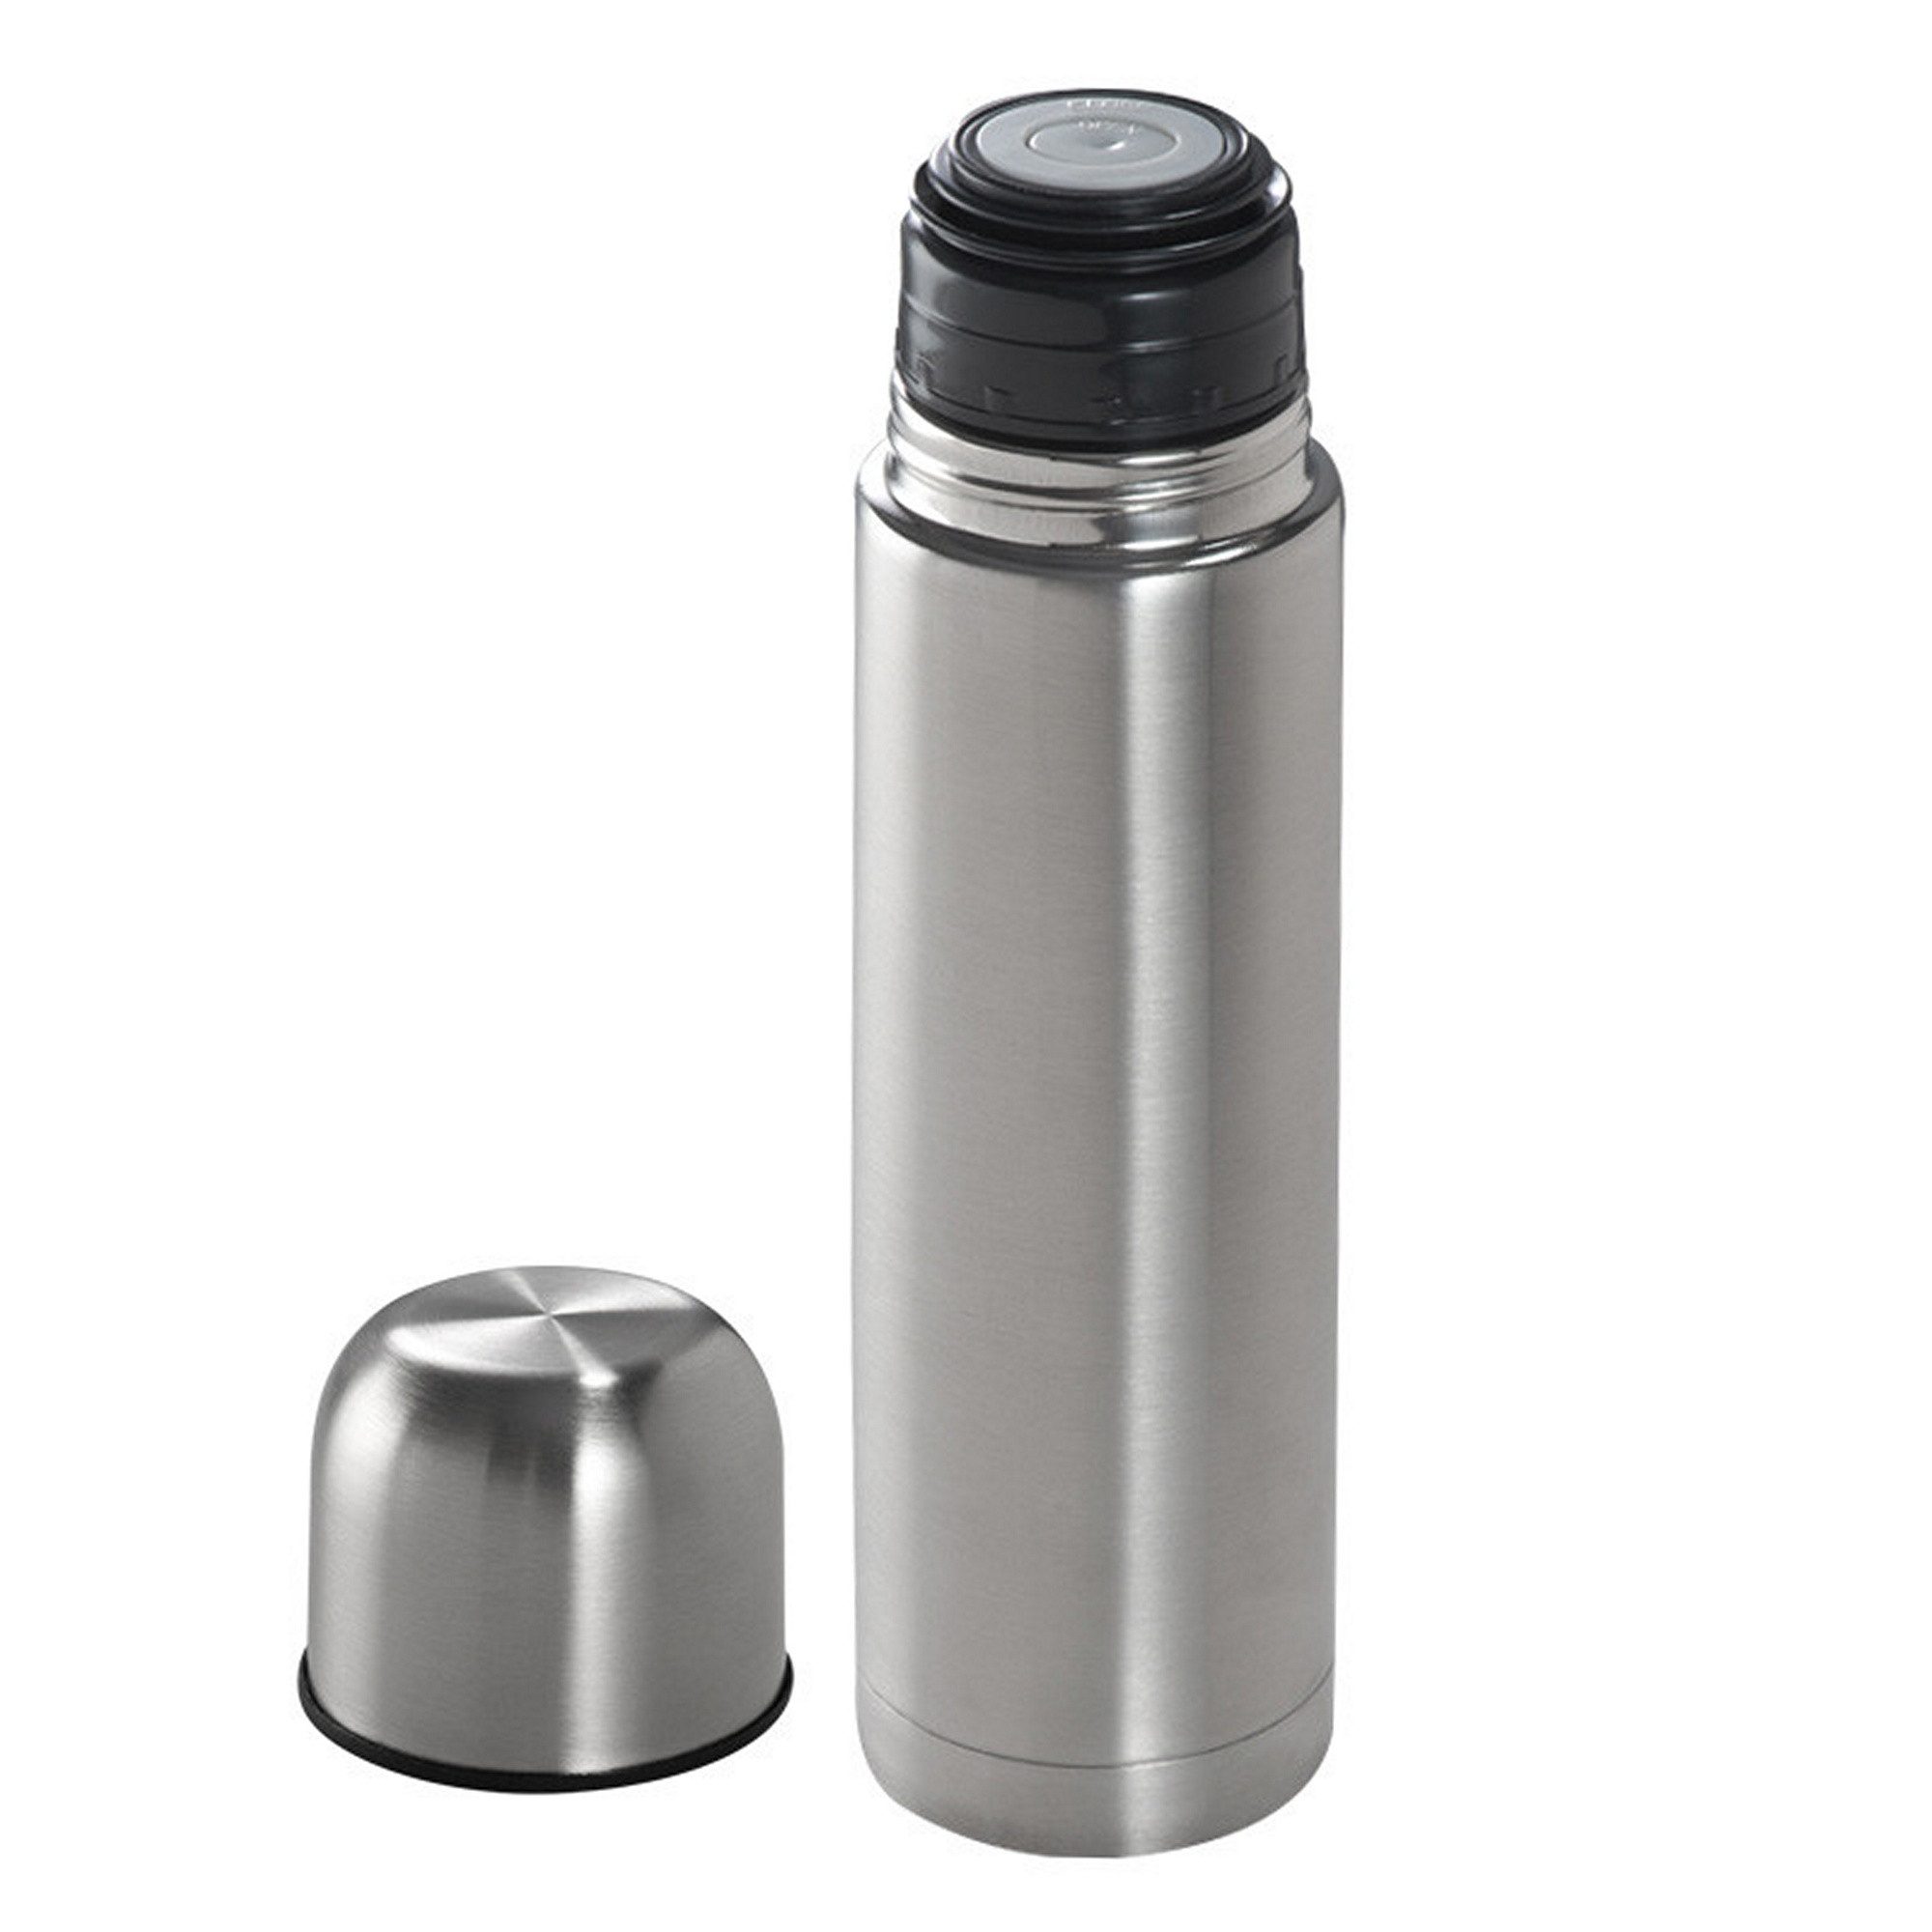 Livepac Office Trinkflasche Edelstahl Isolierkanne / Thermosflasche / Thermoskanne / Farbe: silber